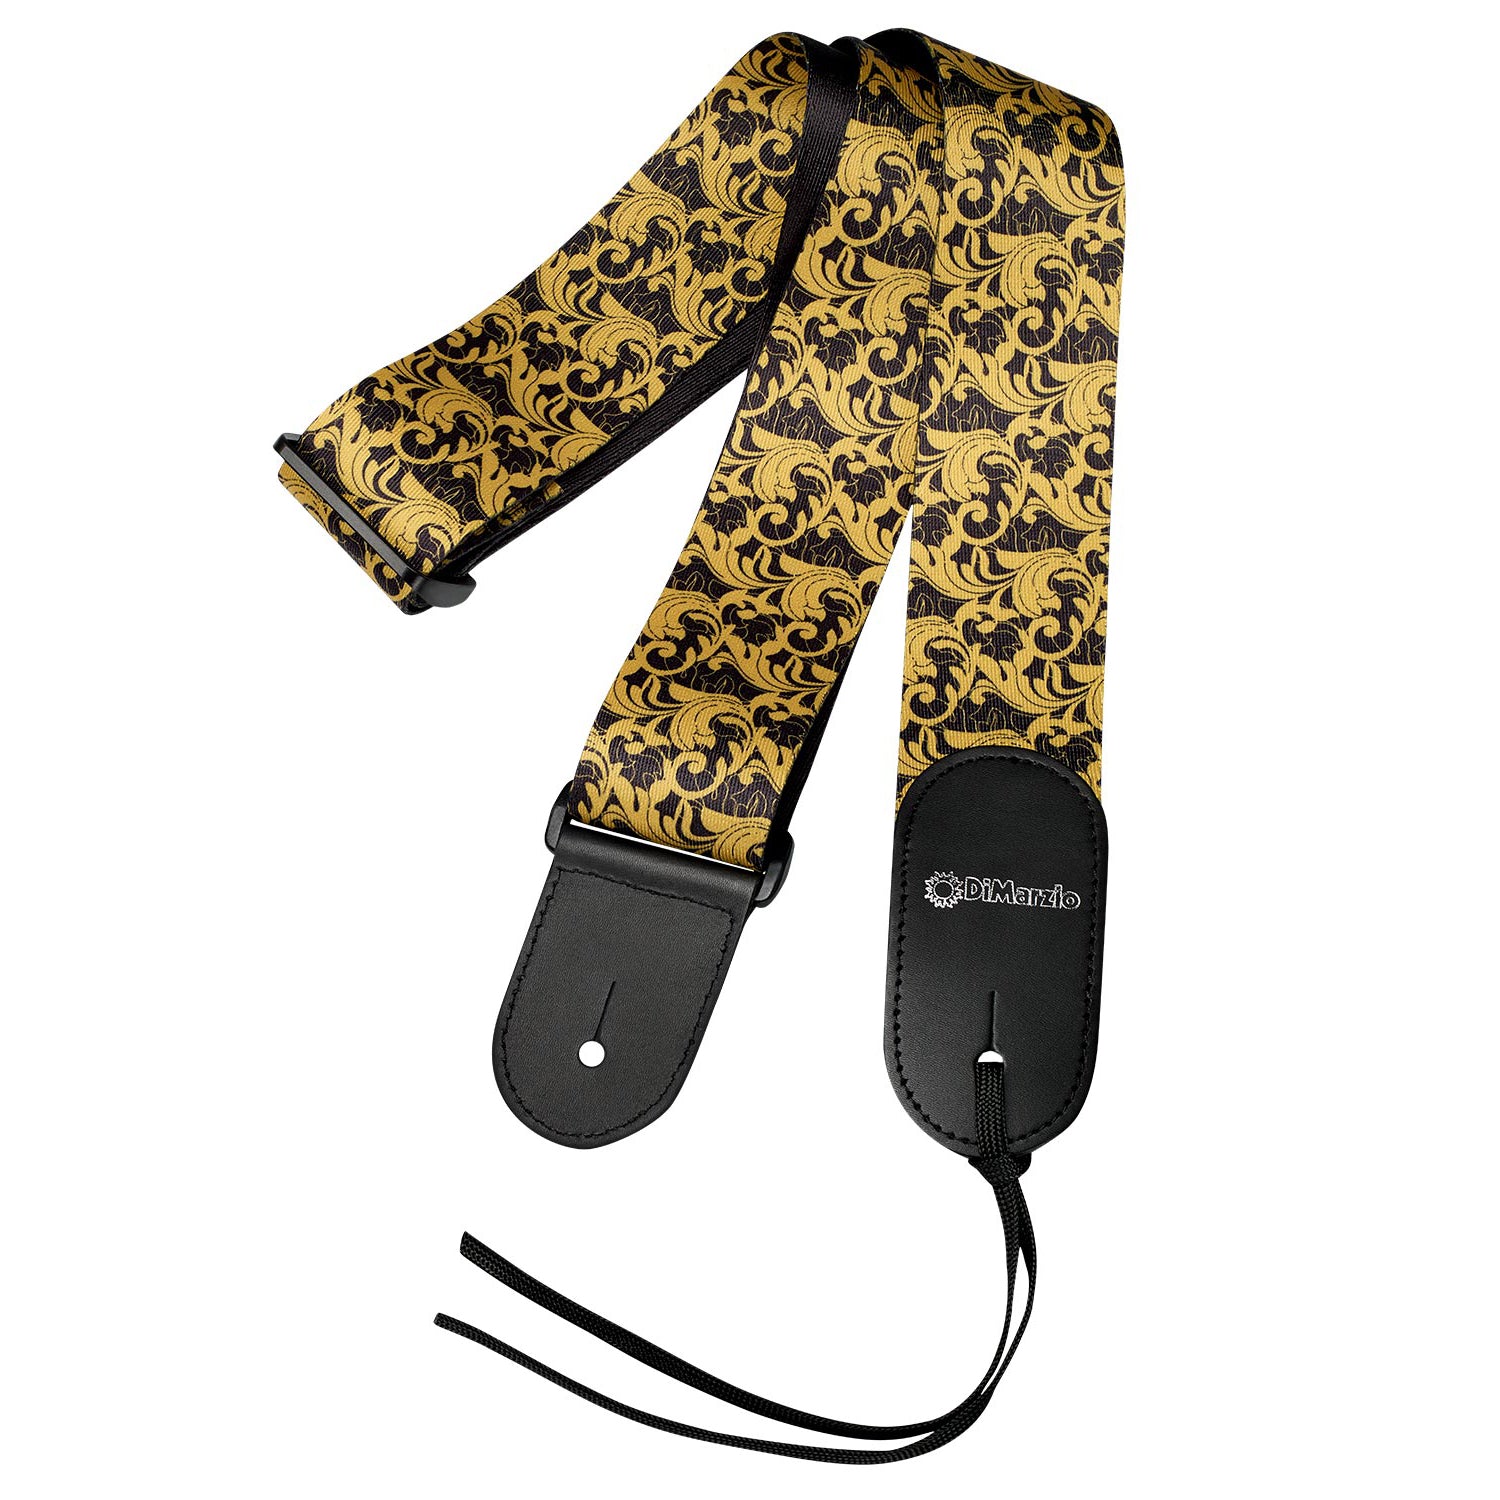  Image of a guitar strap against white background. the guitar strap has black at the bottom where it attaches to the guitar and in white says "DiMarzio". the strap is black and gold with a leafy swirled pattern.